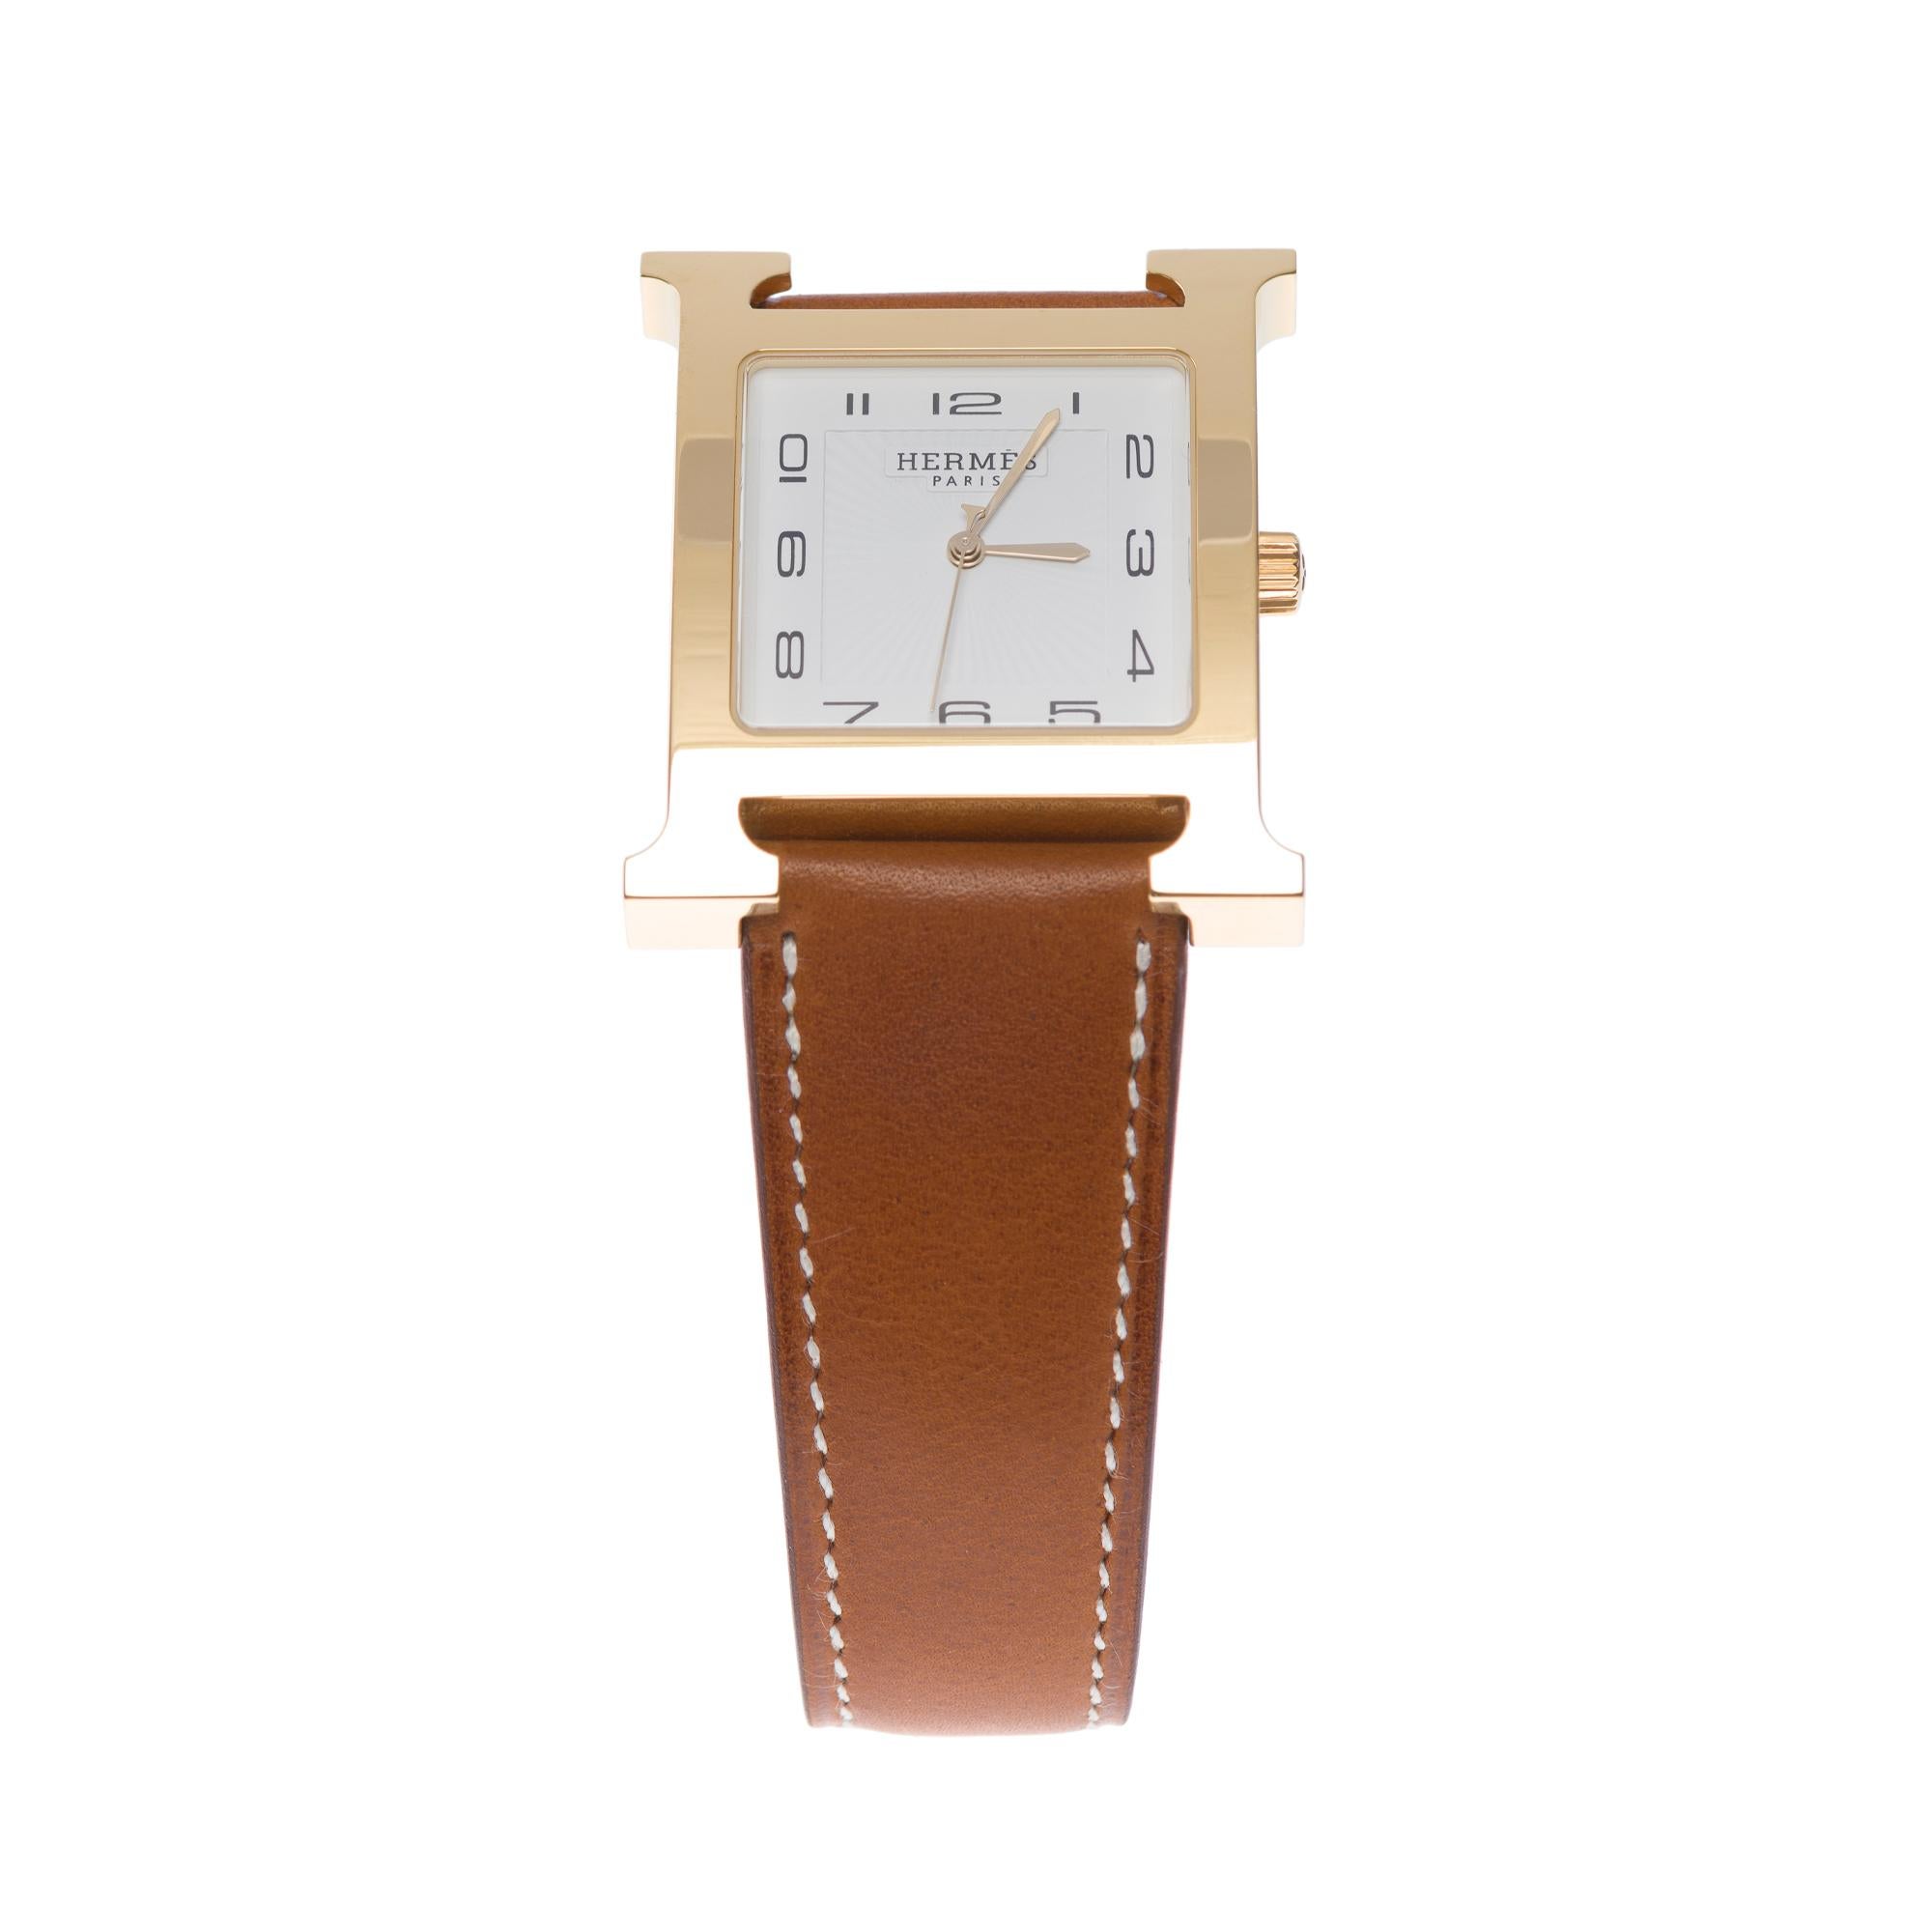 Very Classy Hermès Heure H Grand modèle Watch

Large model, 34 mm
Horn to horn height: 34 mm
Case width: 30 mm
Yellow gold plated steel box
Anti-reflective sapphire crystal
White dial, striking sun
Quartz movement, made in Switzerland
Function: